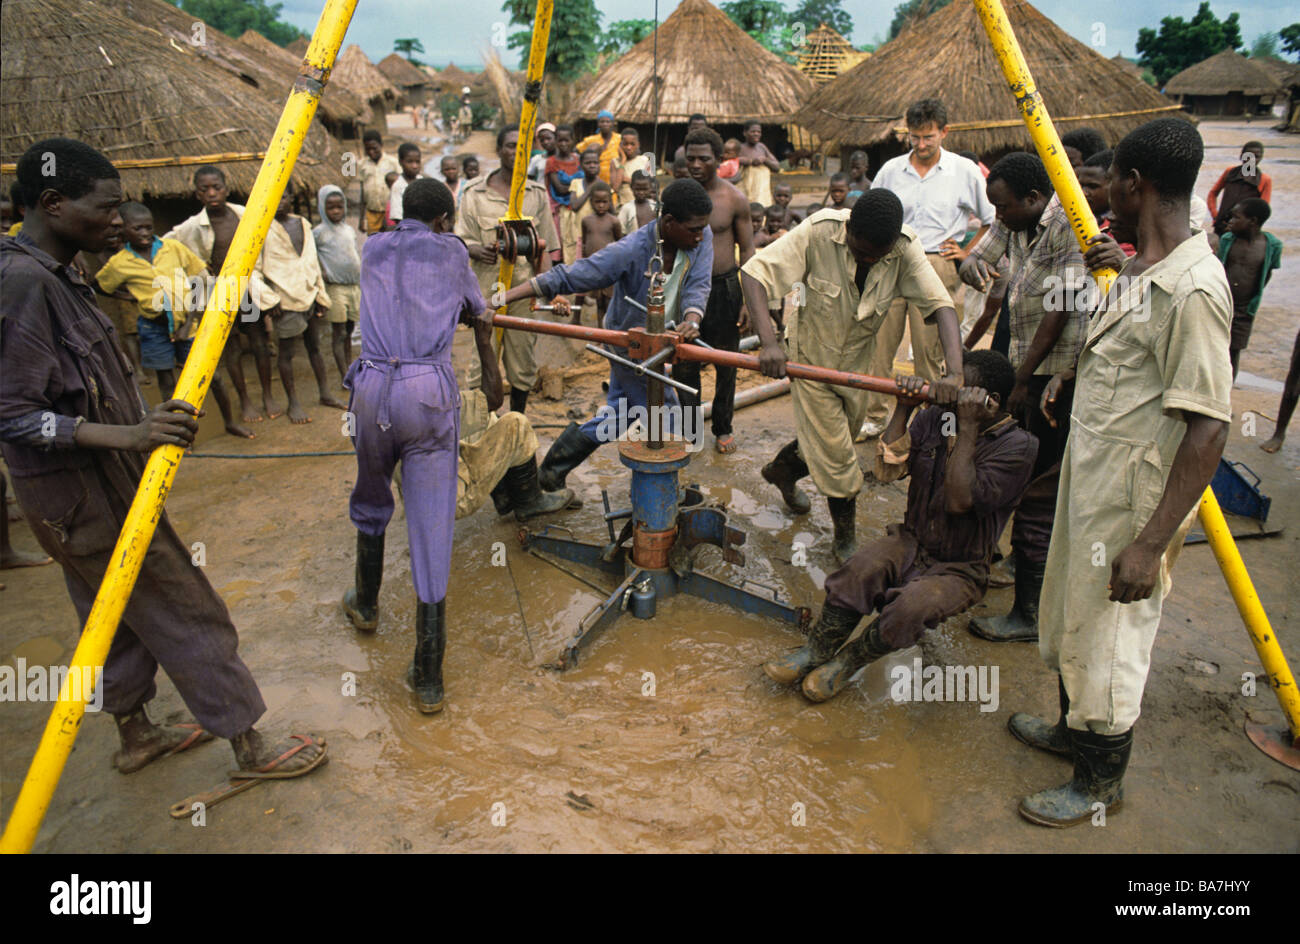 Children crowd around workers boring a well in Malawian village after floods Stock Photo